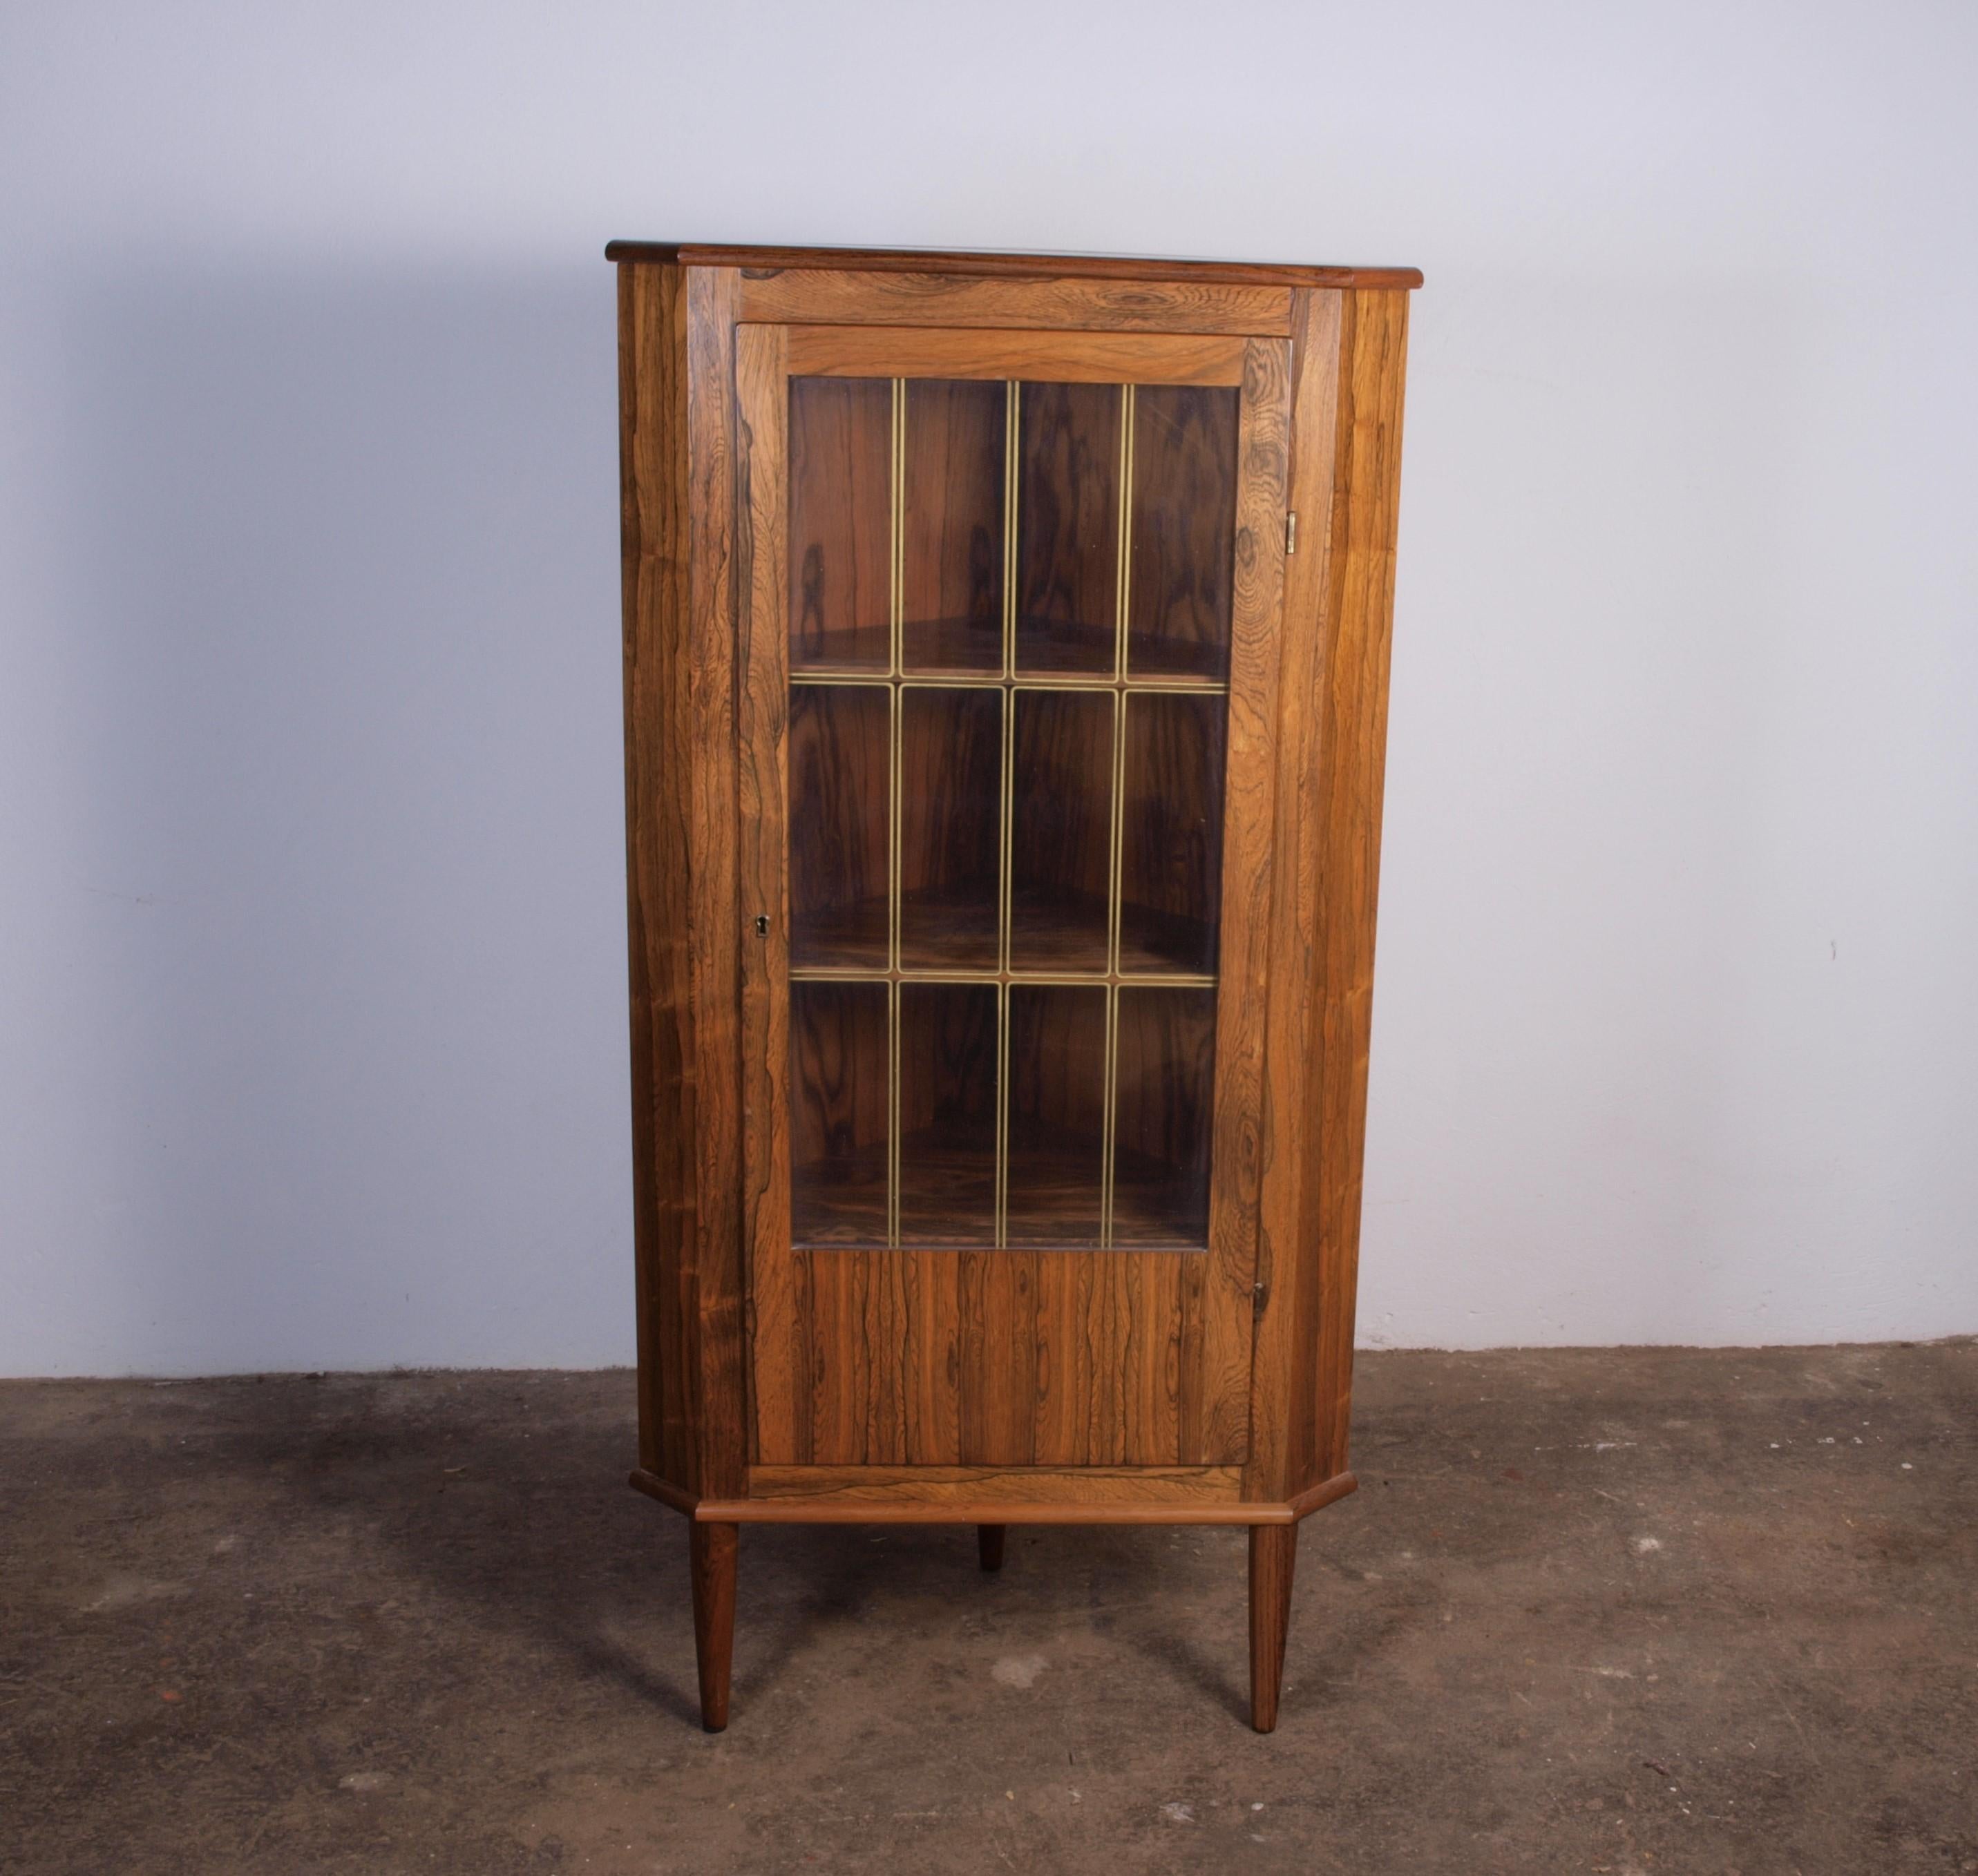 Vintage Danish rosewood corner cabinet from the 1960s, featuring a single large door, a rare find. This sleek piece has a clean design without drawers, showcasing simple yet stylish Danish Design. It serves as a Scandinavian Mid-Century Modern